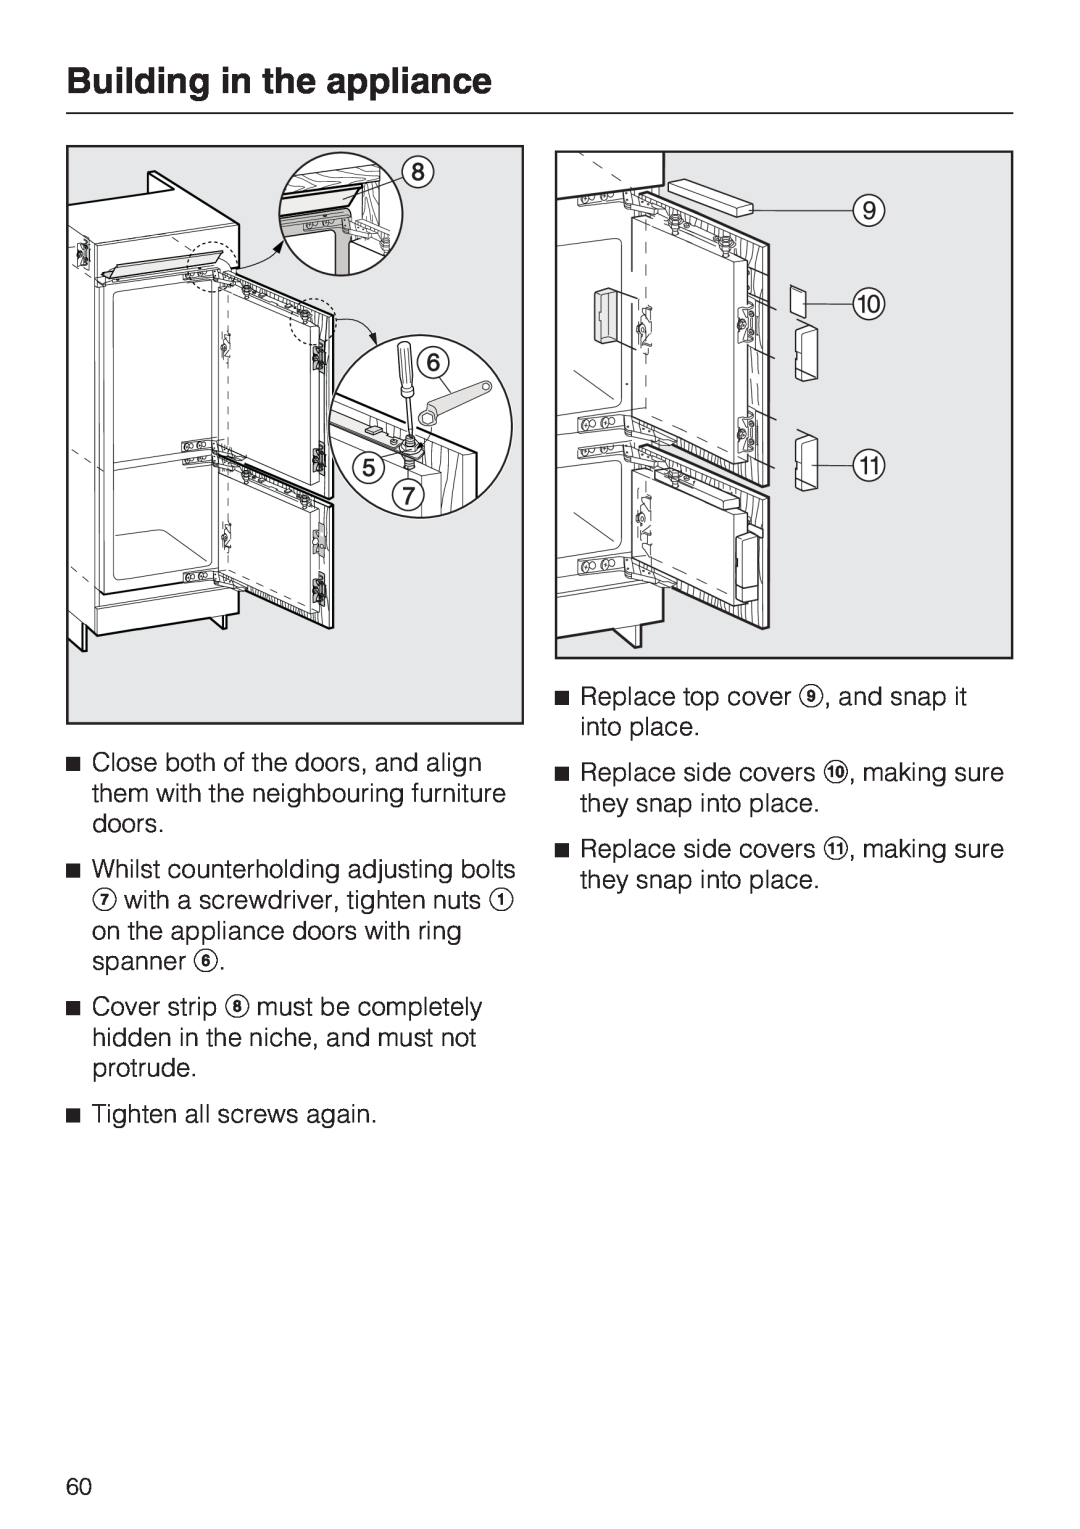 Miele KF 9757 ID installation instructions Building in the appliance, Tighten all screws again 